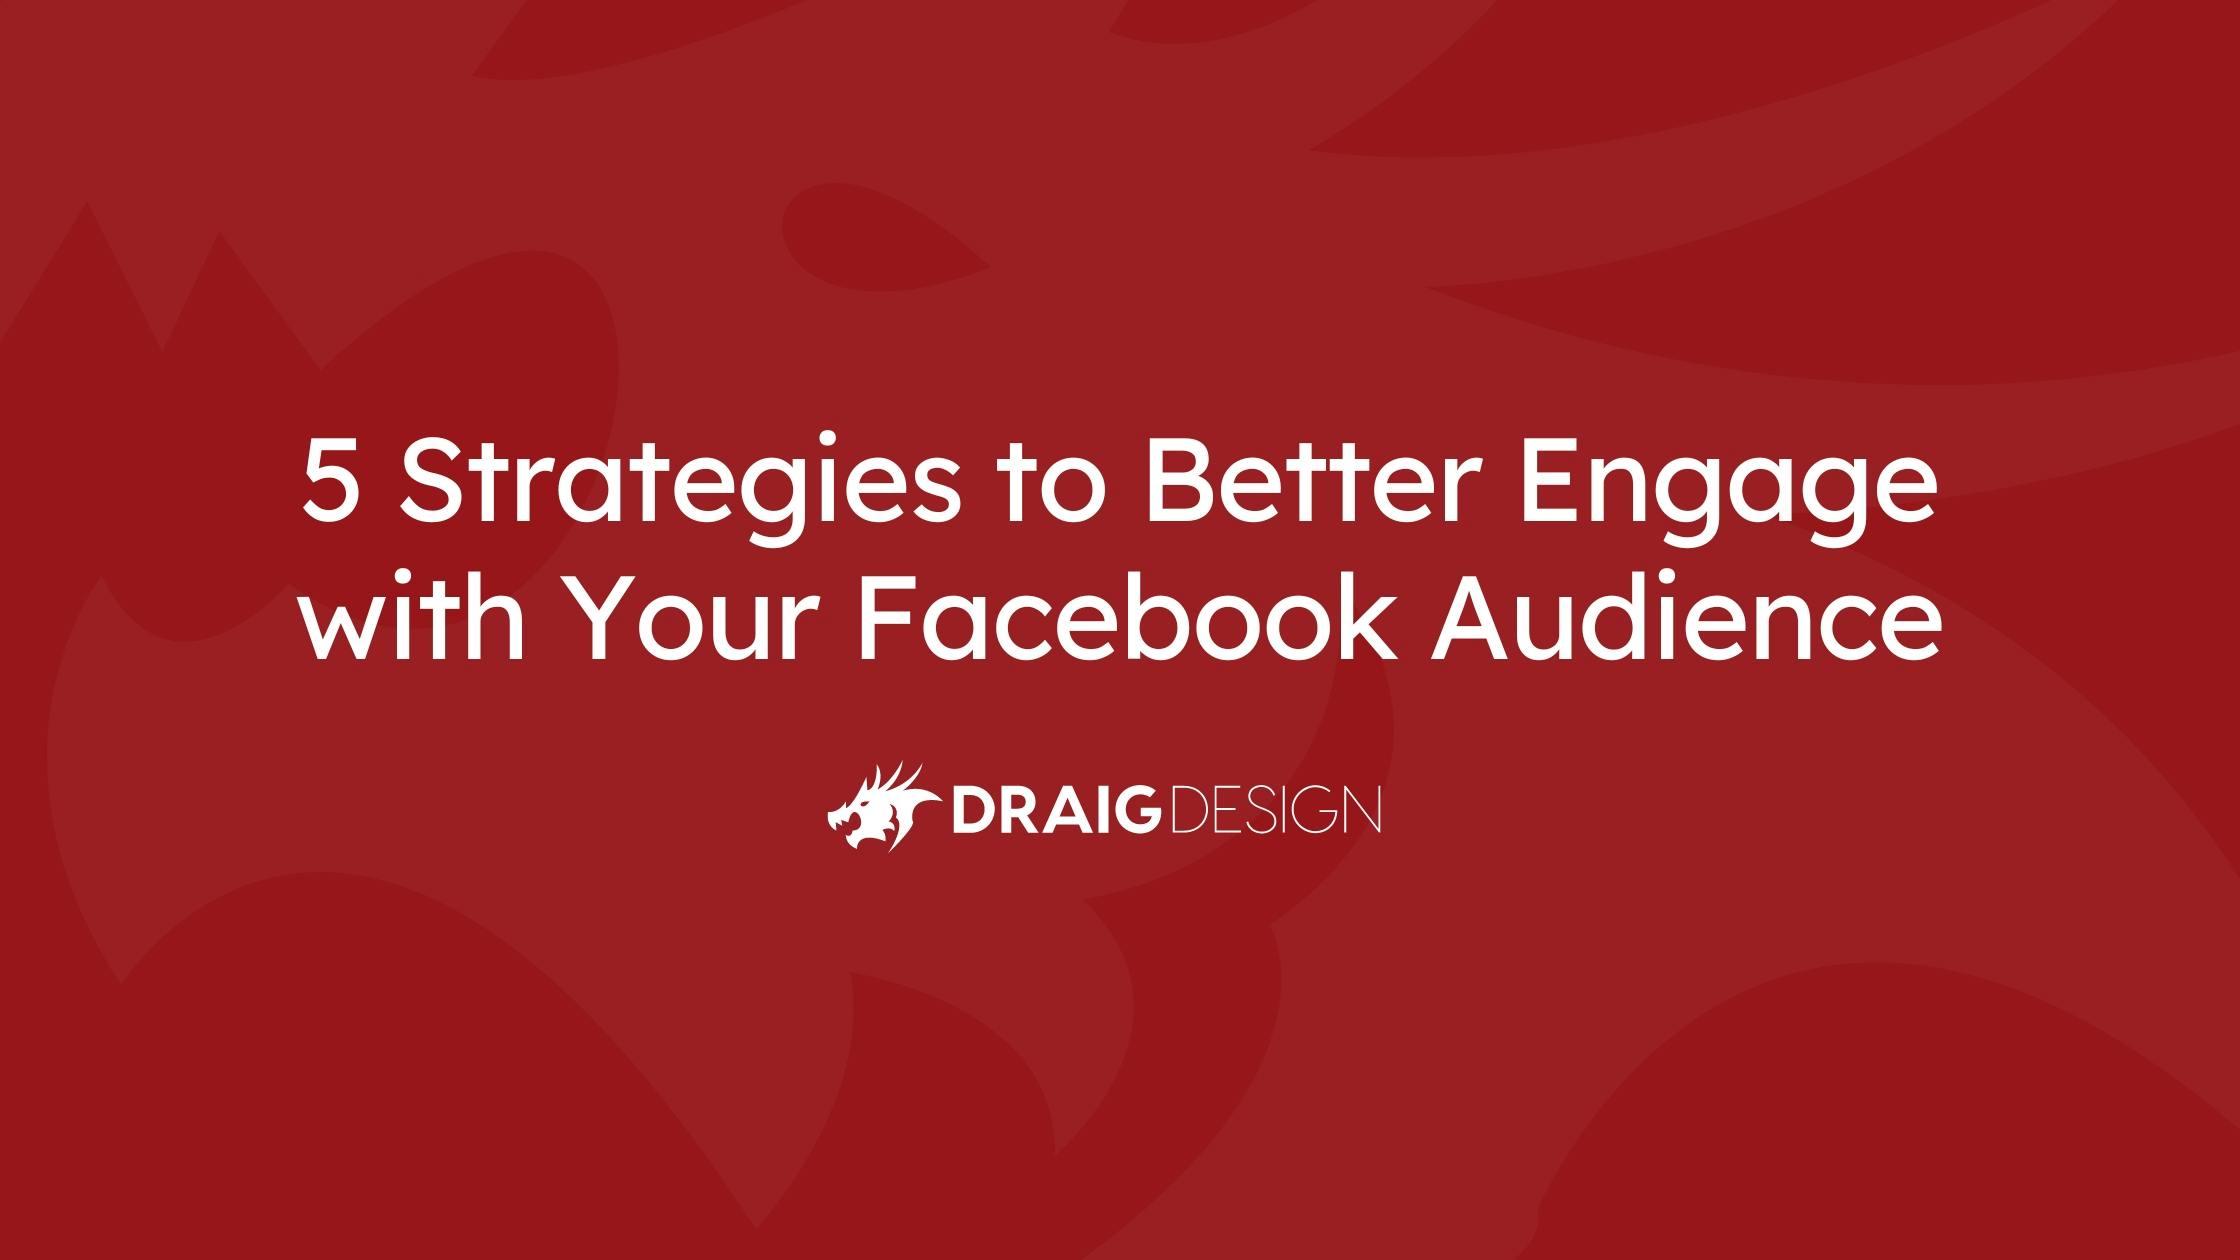 5 Strategies to Better Engage with Your Facebook Audience